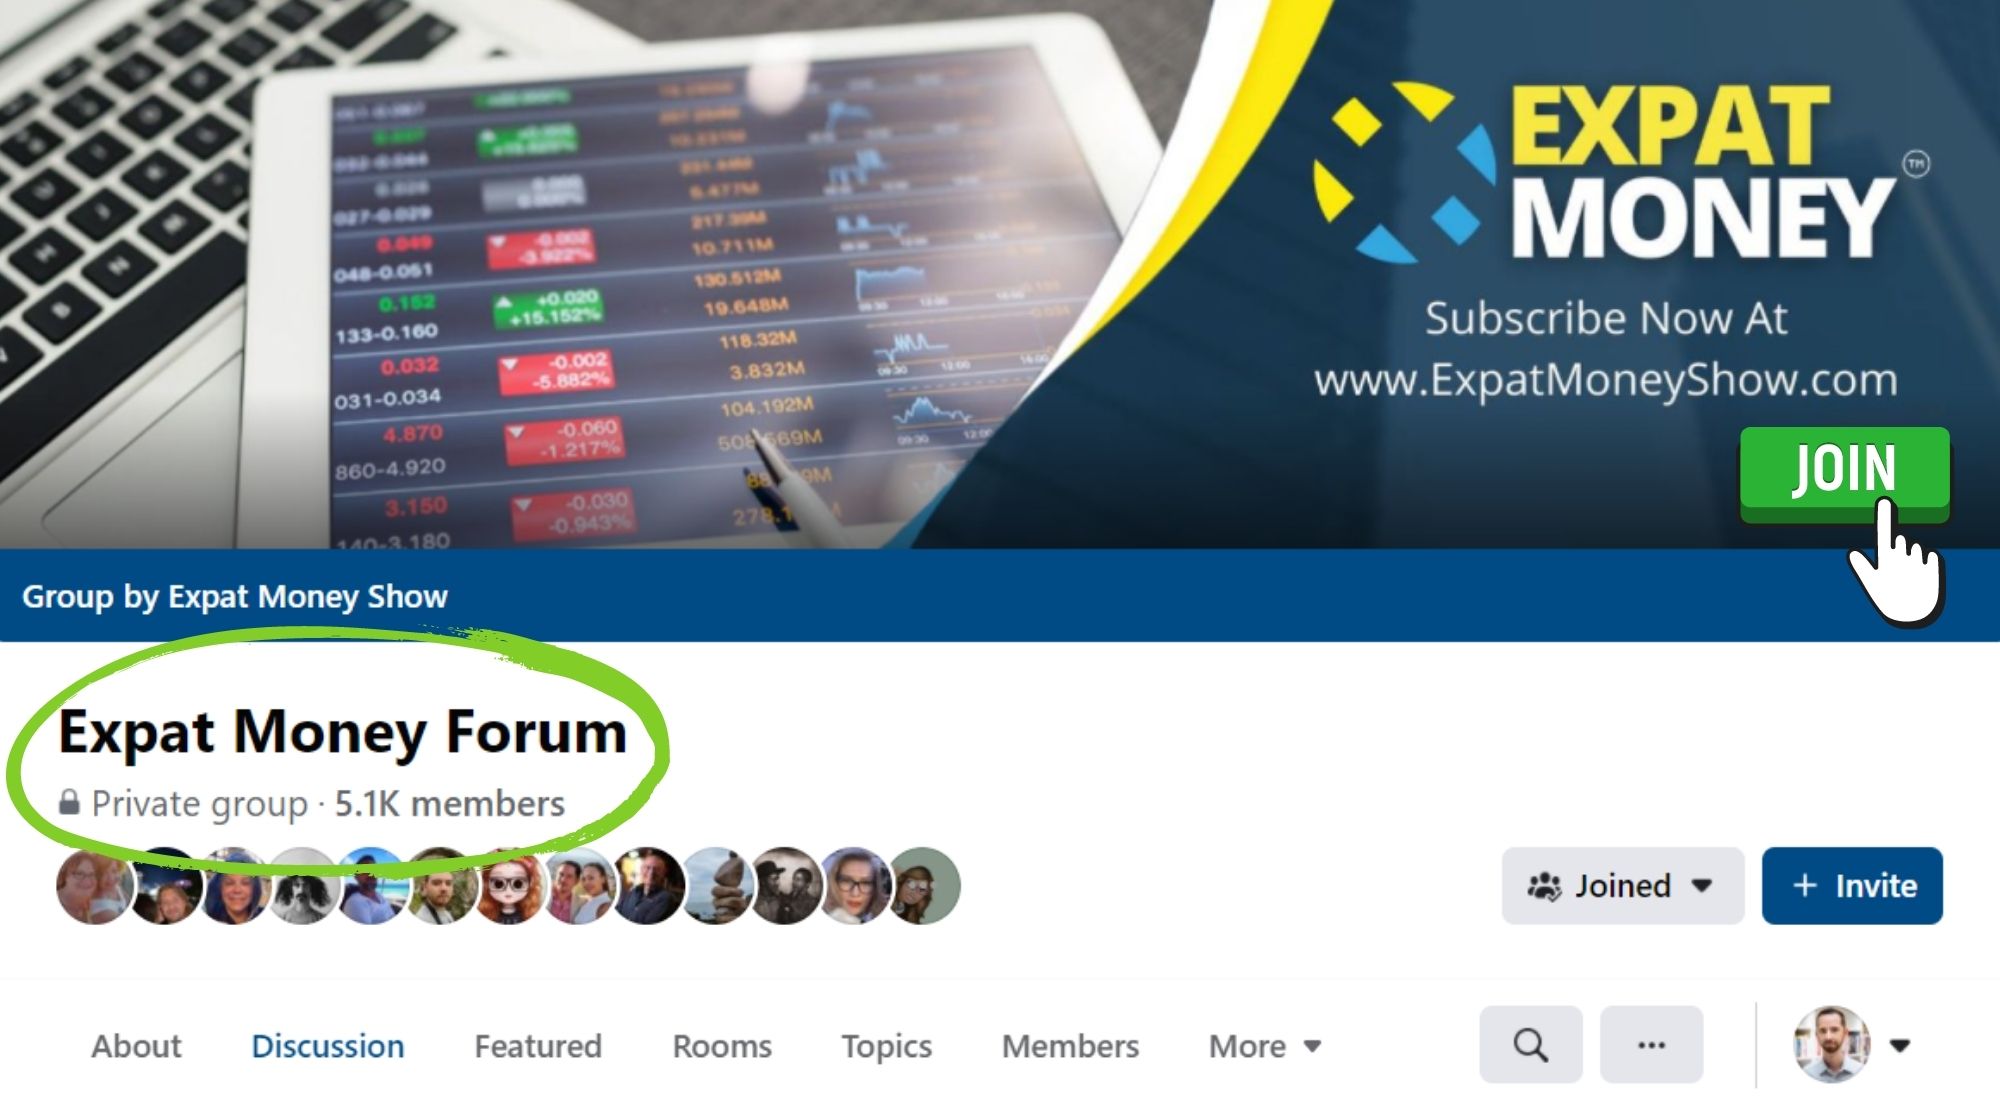 Join the expat money forum